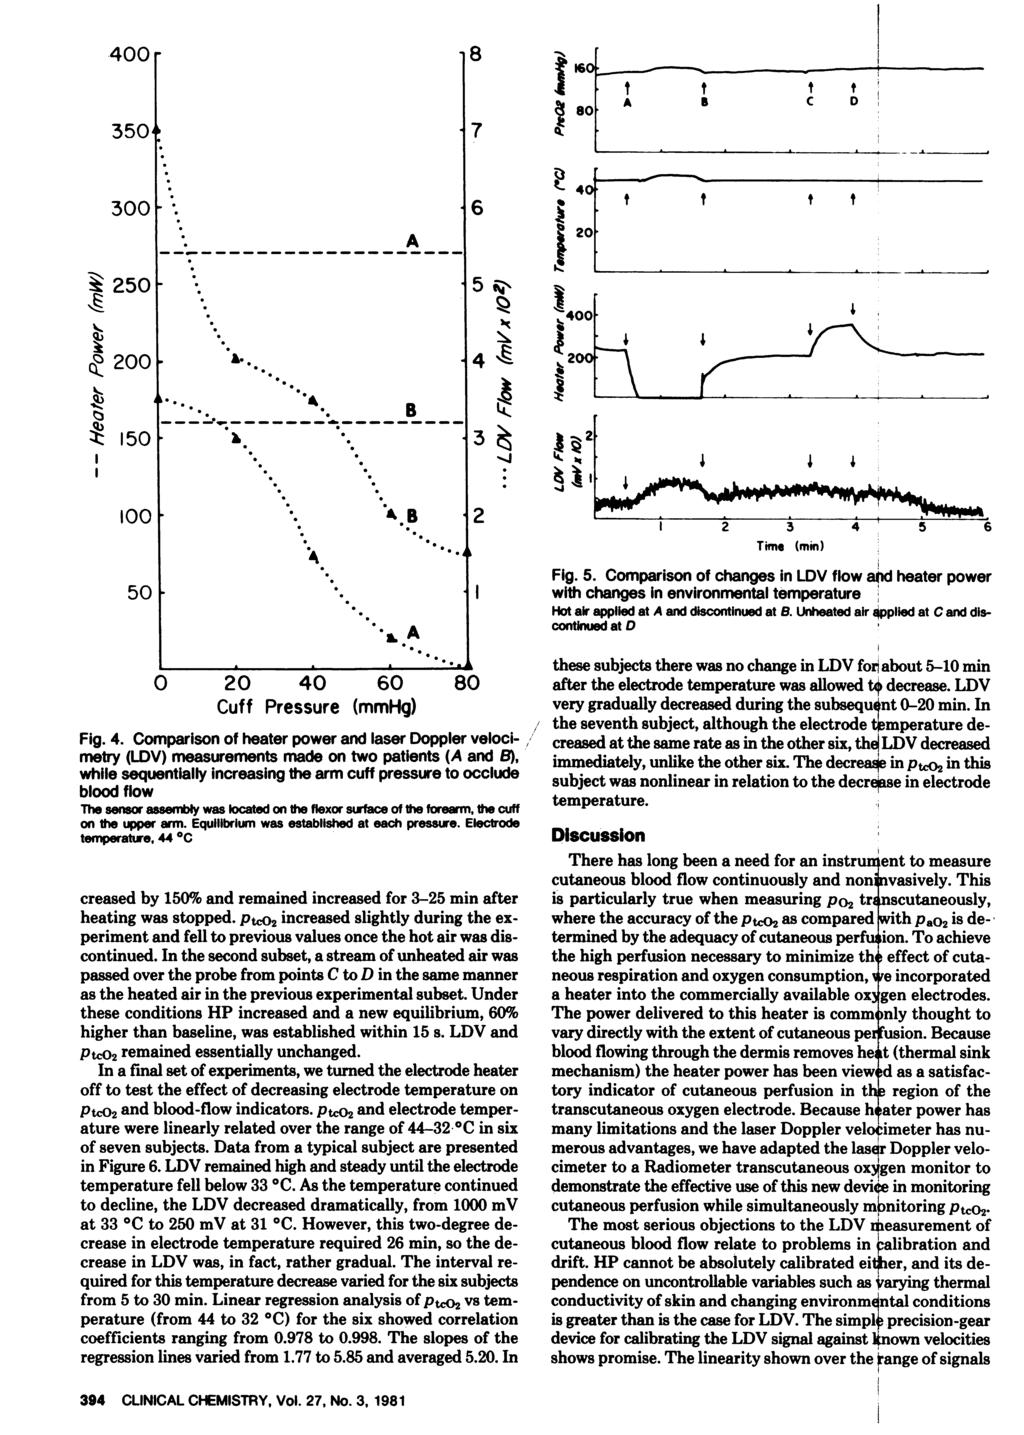 400 8 350 7 SO 80 t t B C 0 300 F. 0-4C 20 250 5j\ 4 200 4 B 50 3 4 1 B 2 2 3 4 5 6 Time (min 50 S. Fig. 5. Comparison of changes in LDV flow and heater power with changes in environmental temperature Hotair applied at and discontinuedat B.